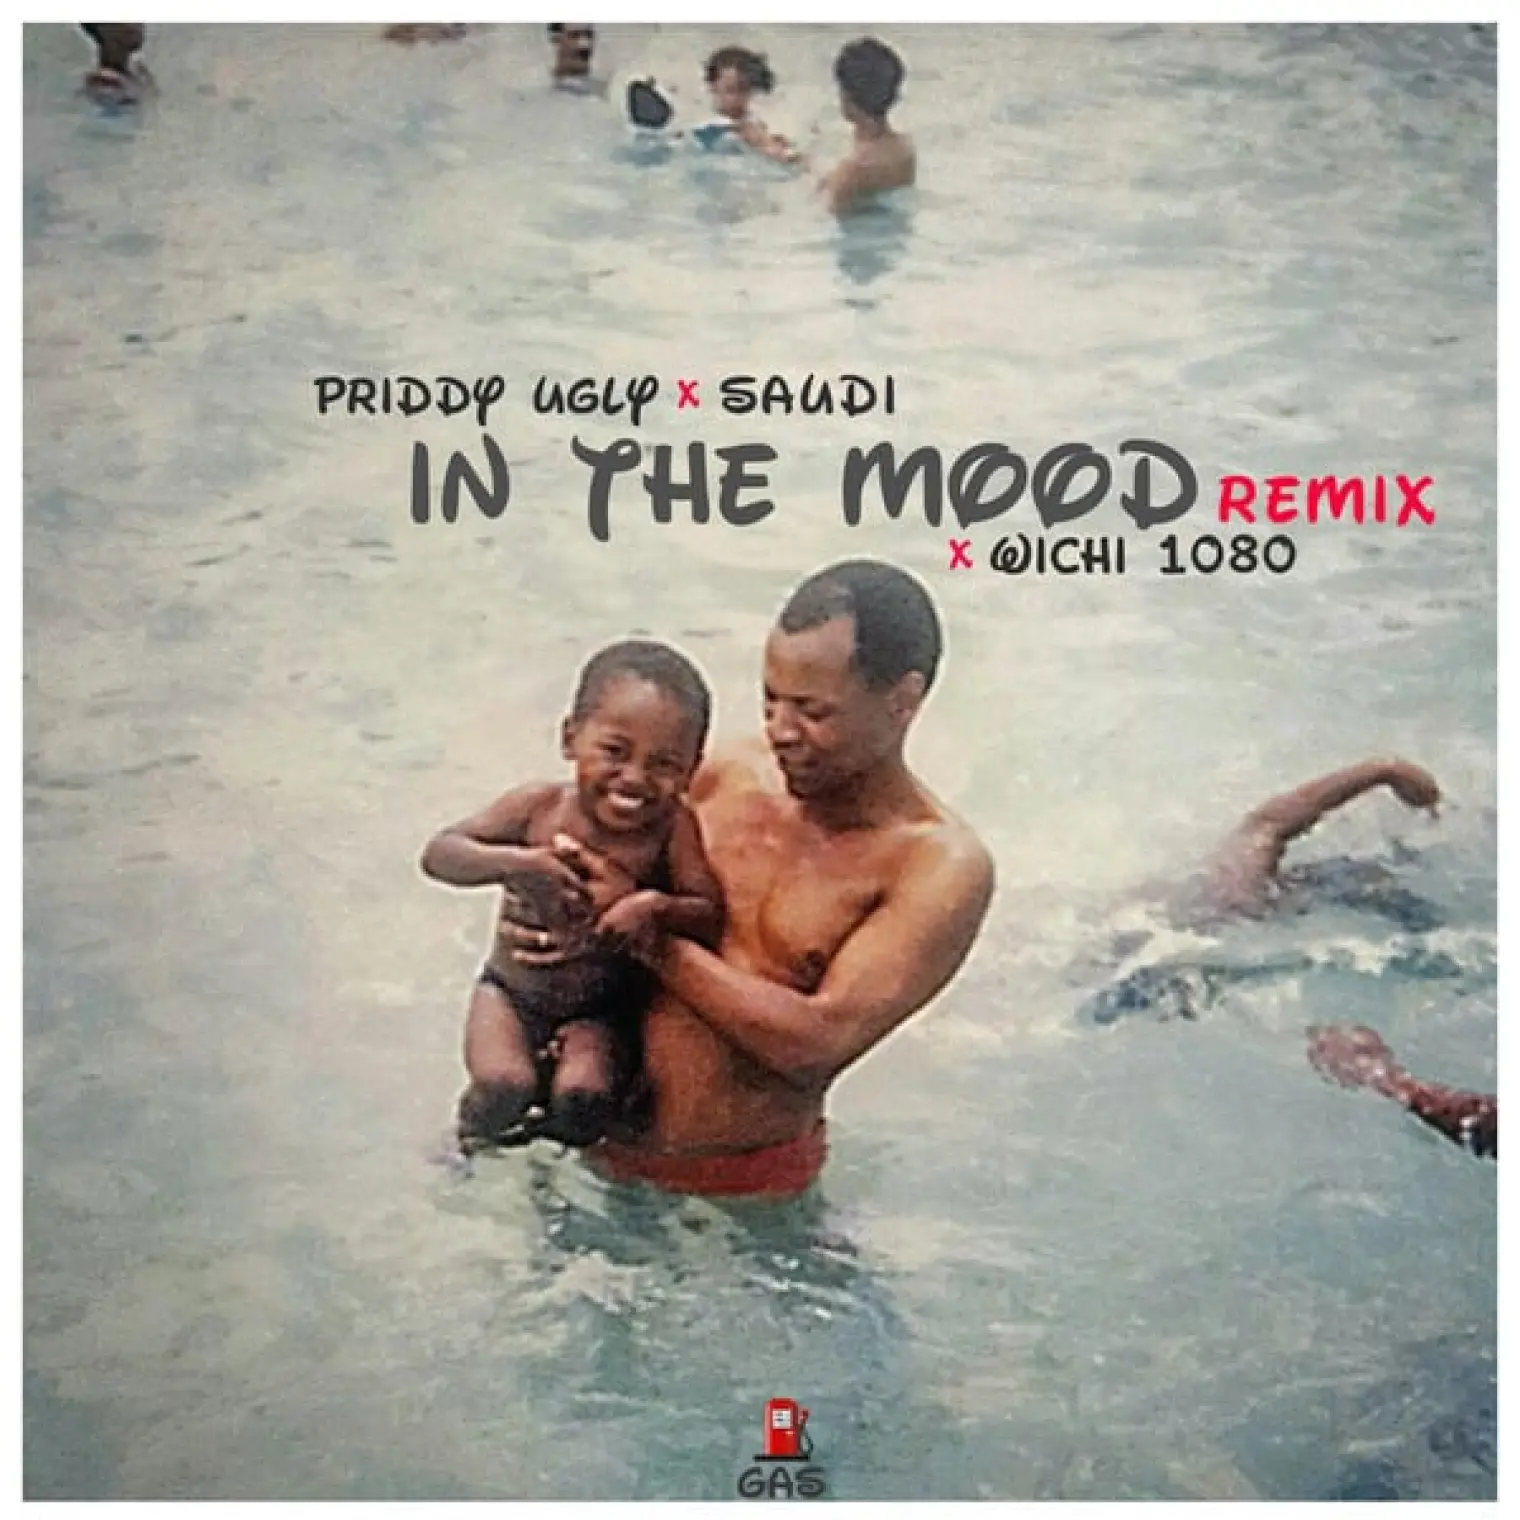 In The Mood Remix Single -  Priddy Ugly 